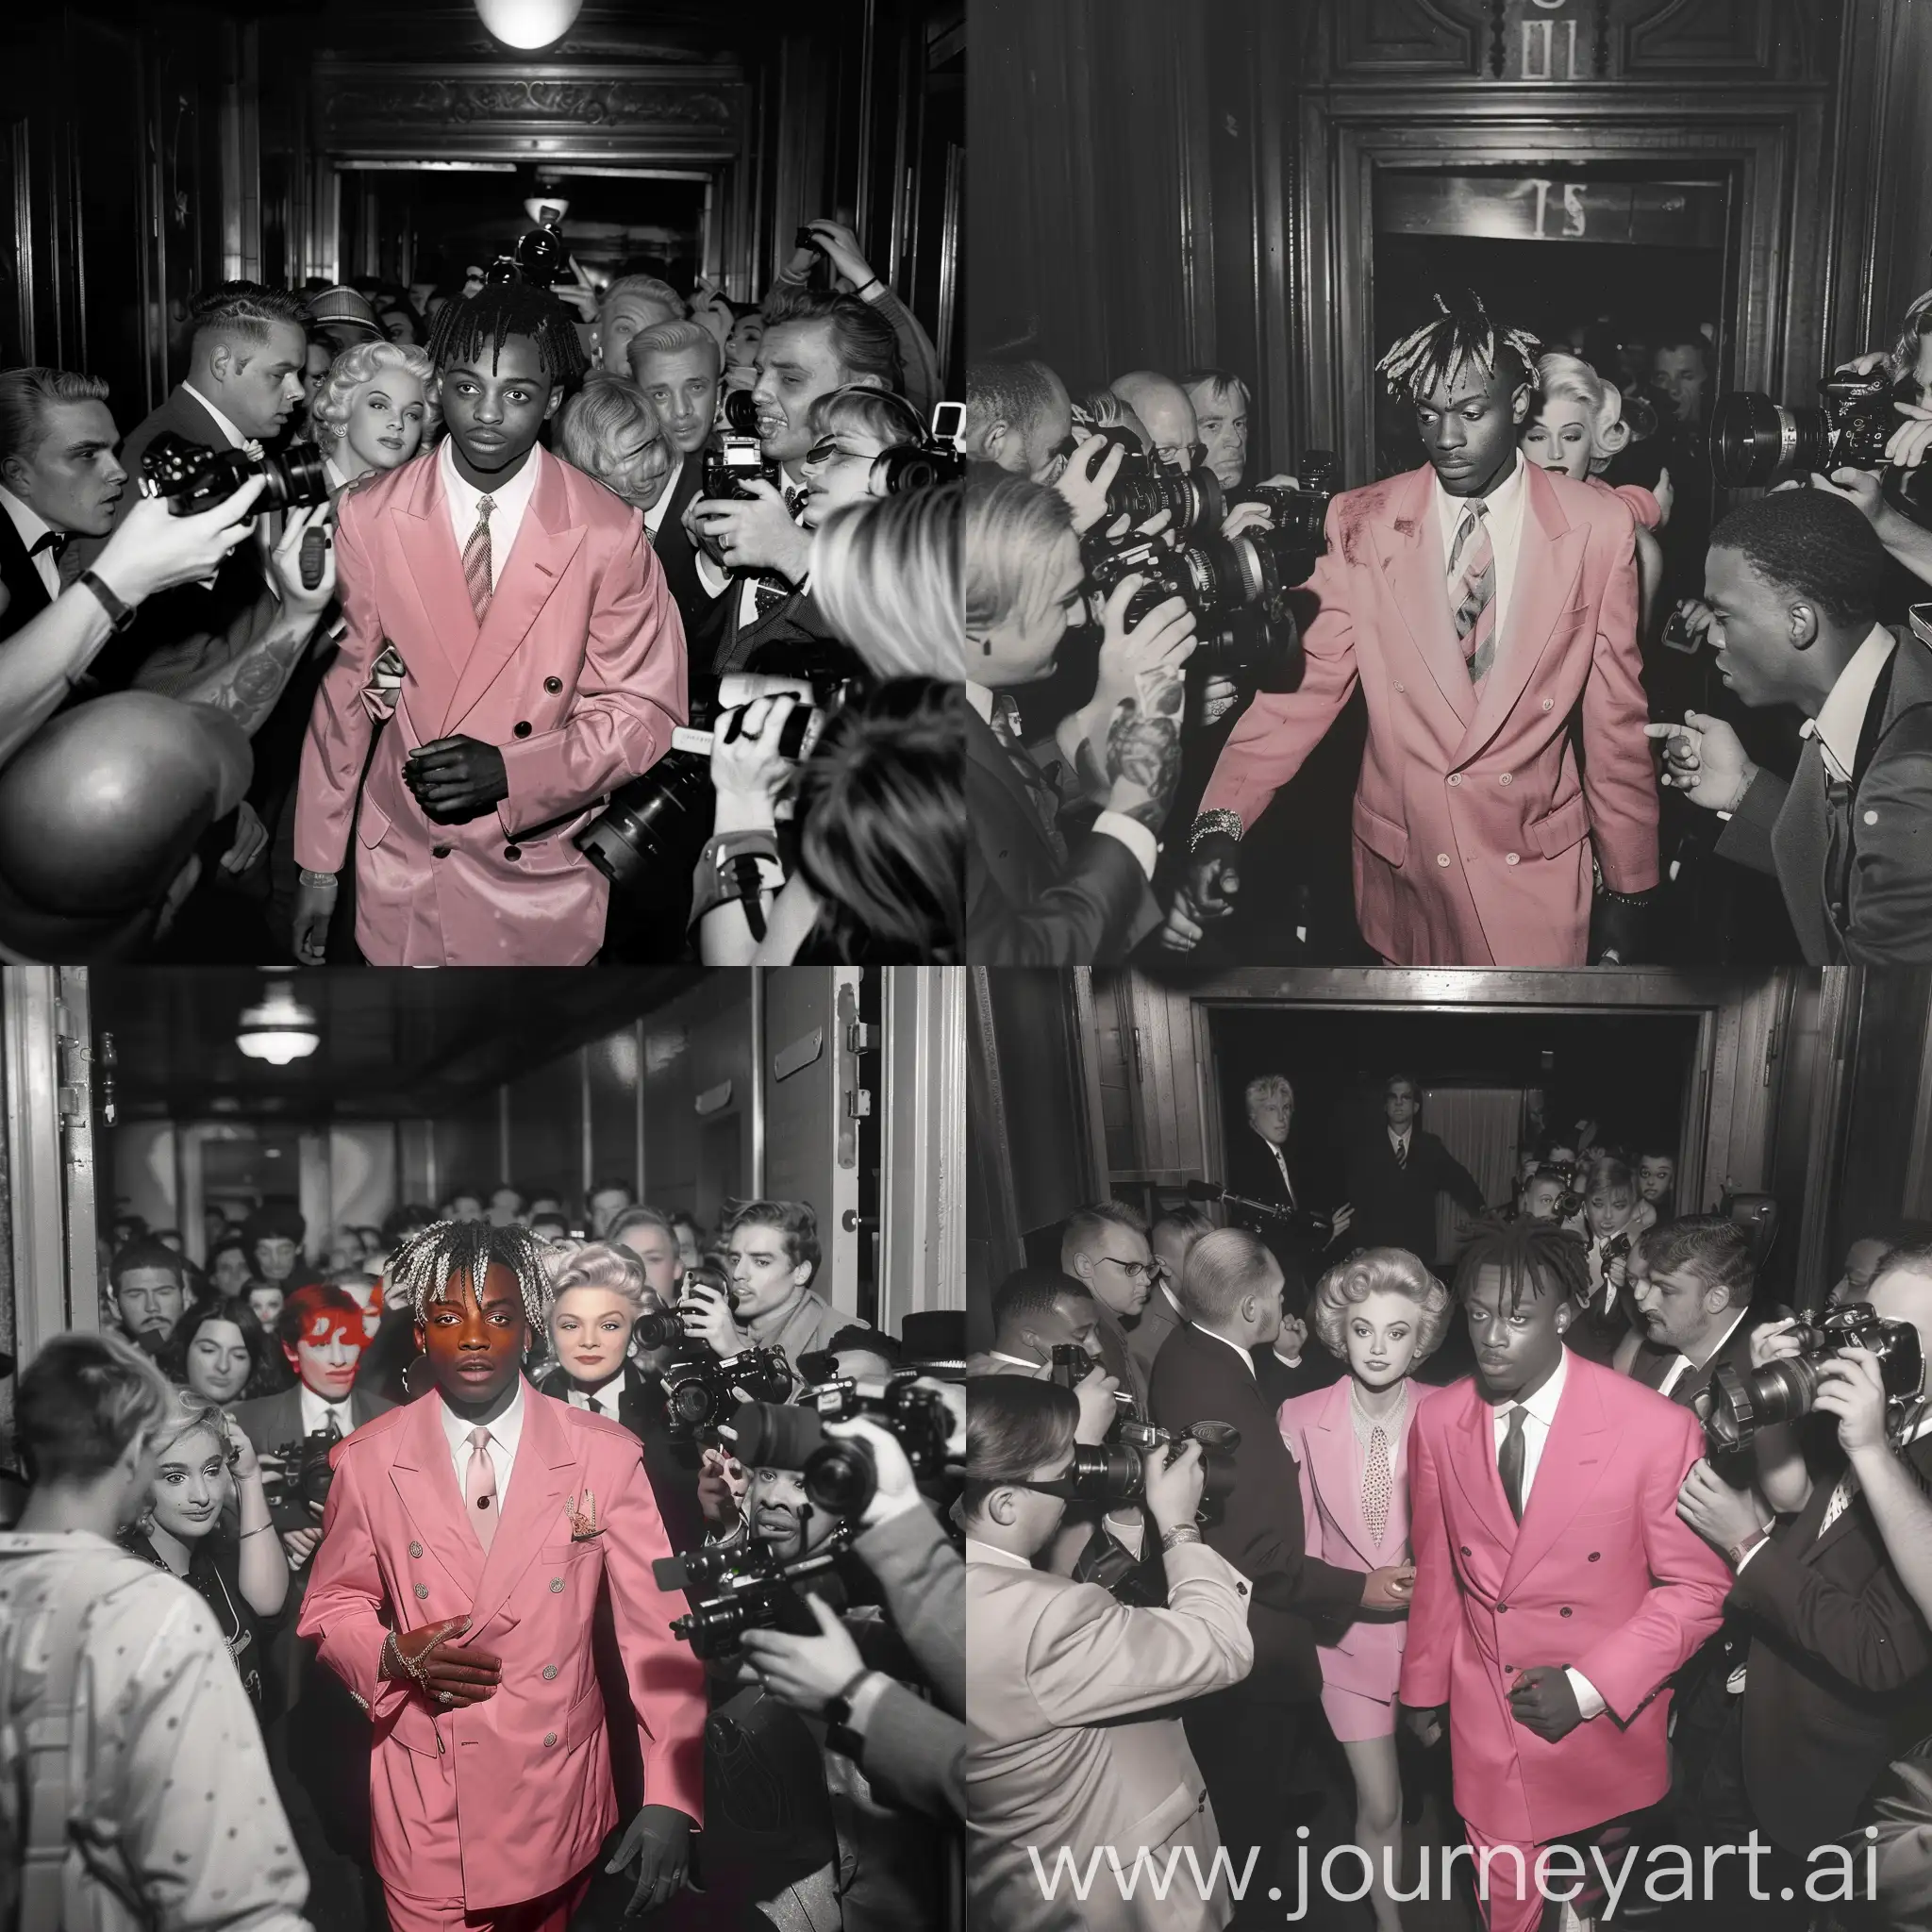 A 1960s Black and white photograph,Of Juice WRLD and Marilyn Monroe coming out a theatre with a pink suit and tie ,surrounded by paparazzi.